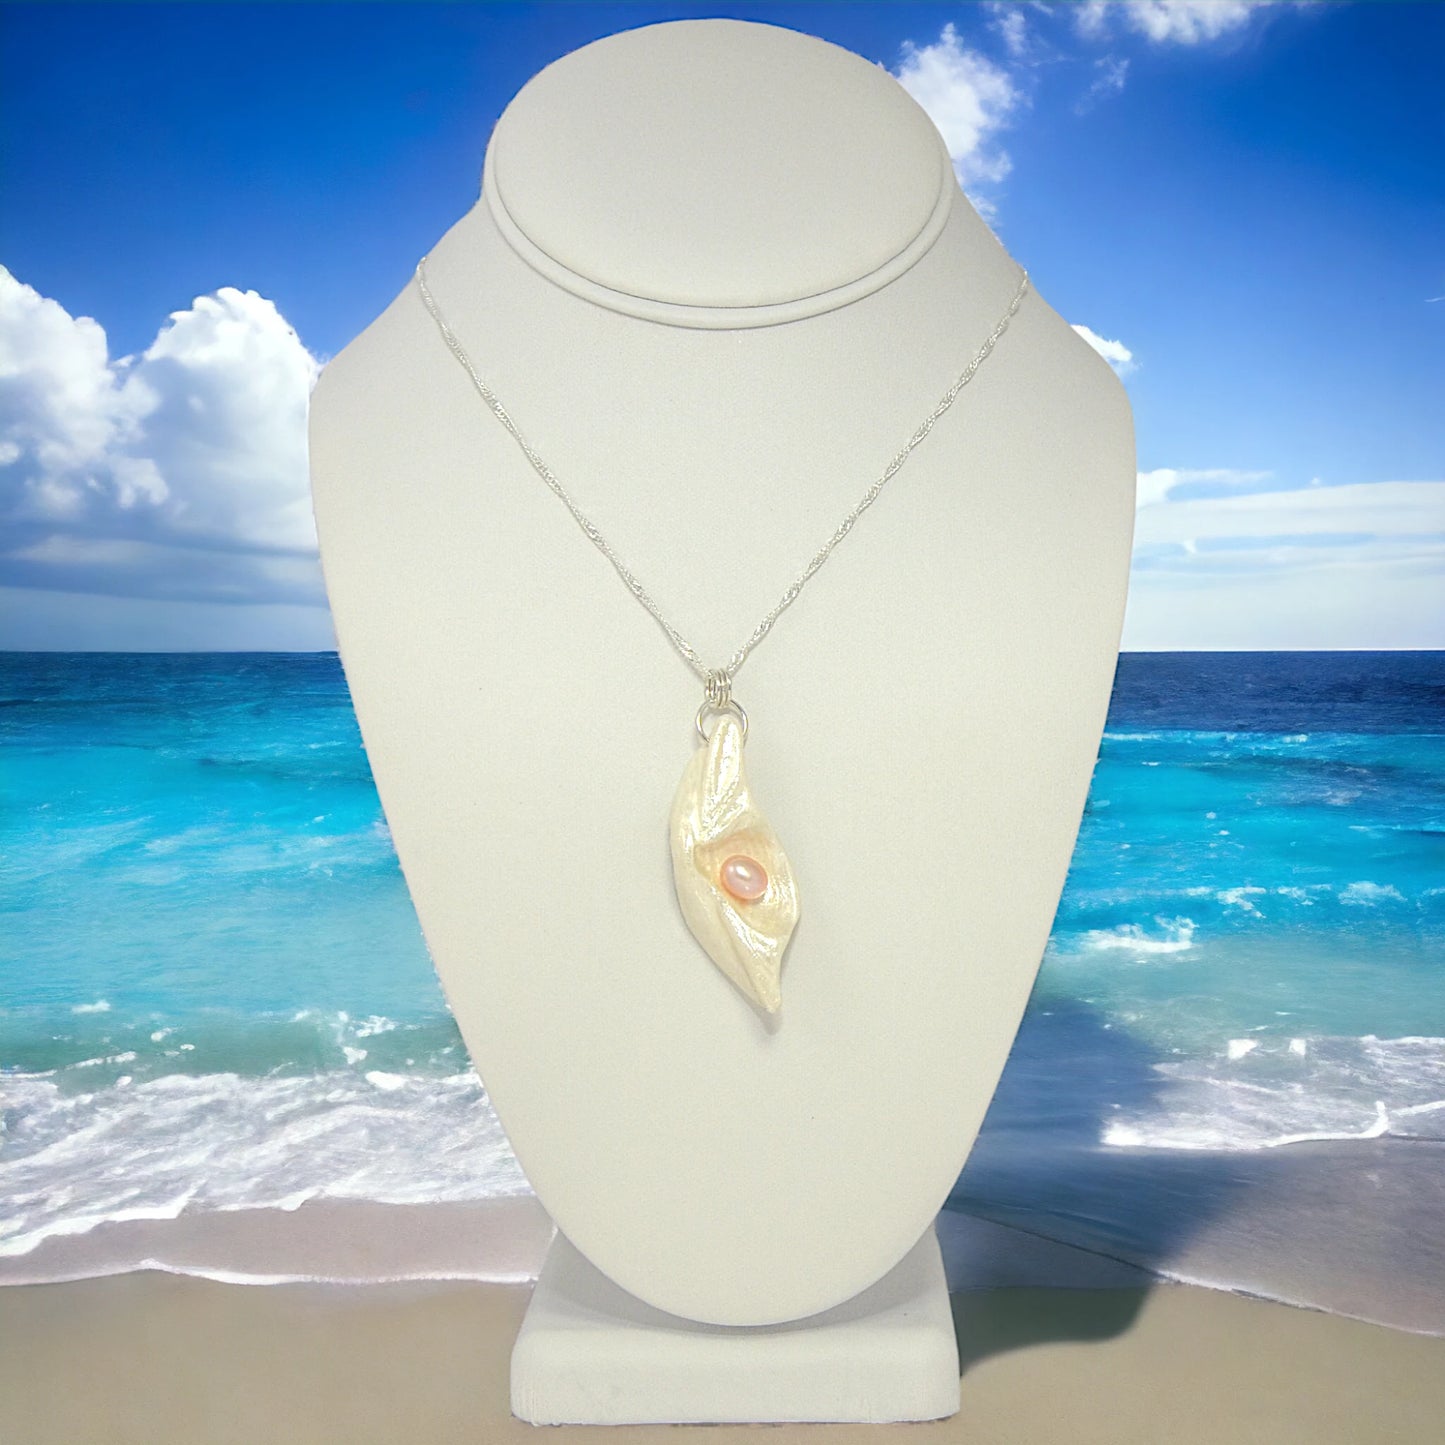 Glow natural seashell pendant with a pink freshwater pearl. The pendant is shown on a white necklace displayer with an ocean background.